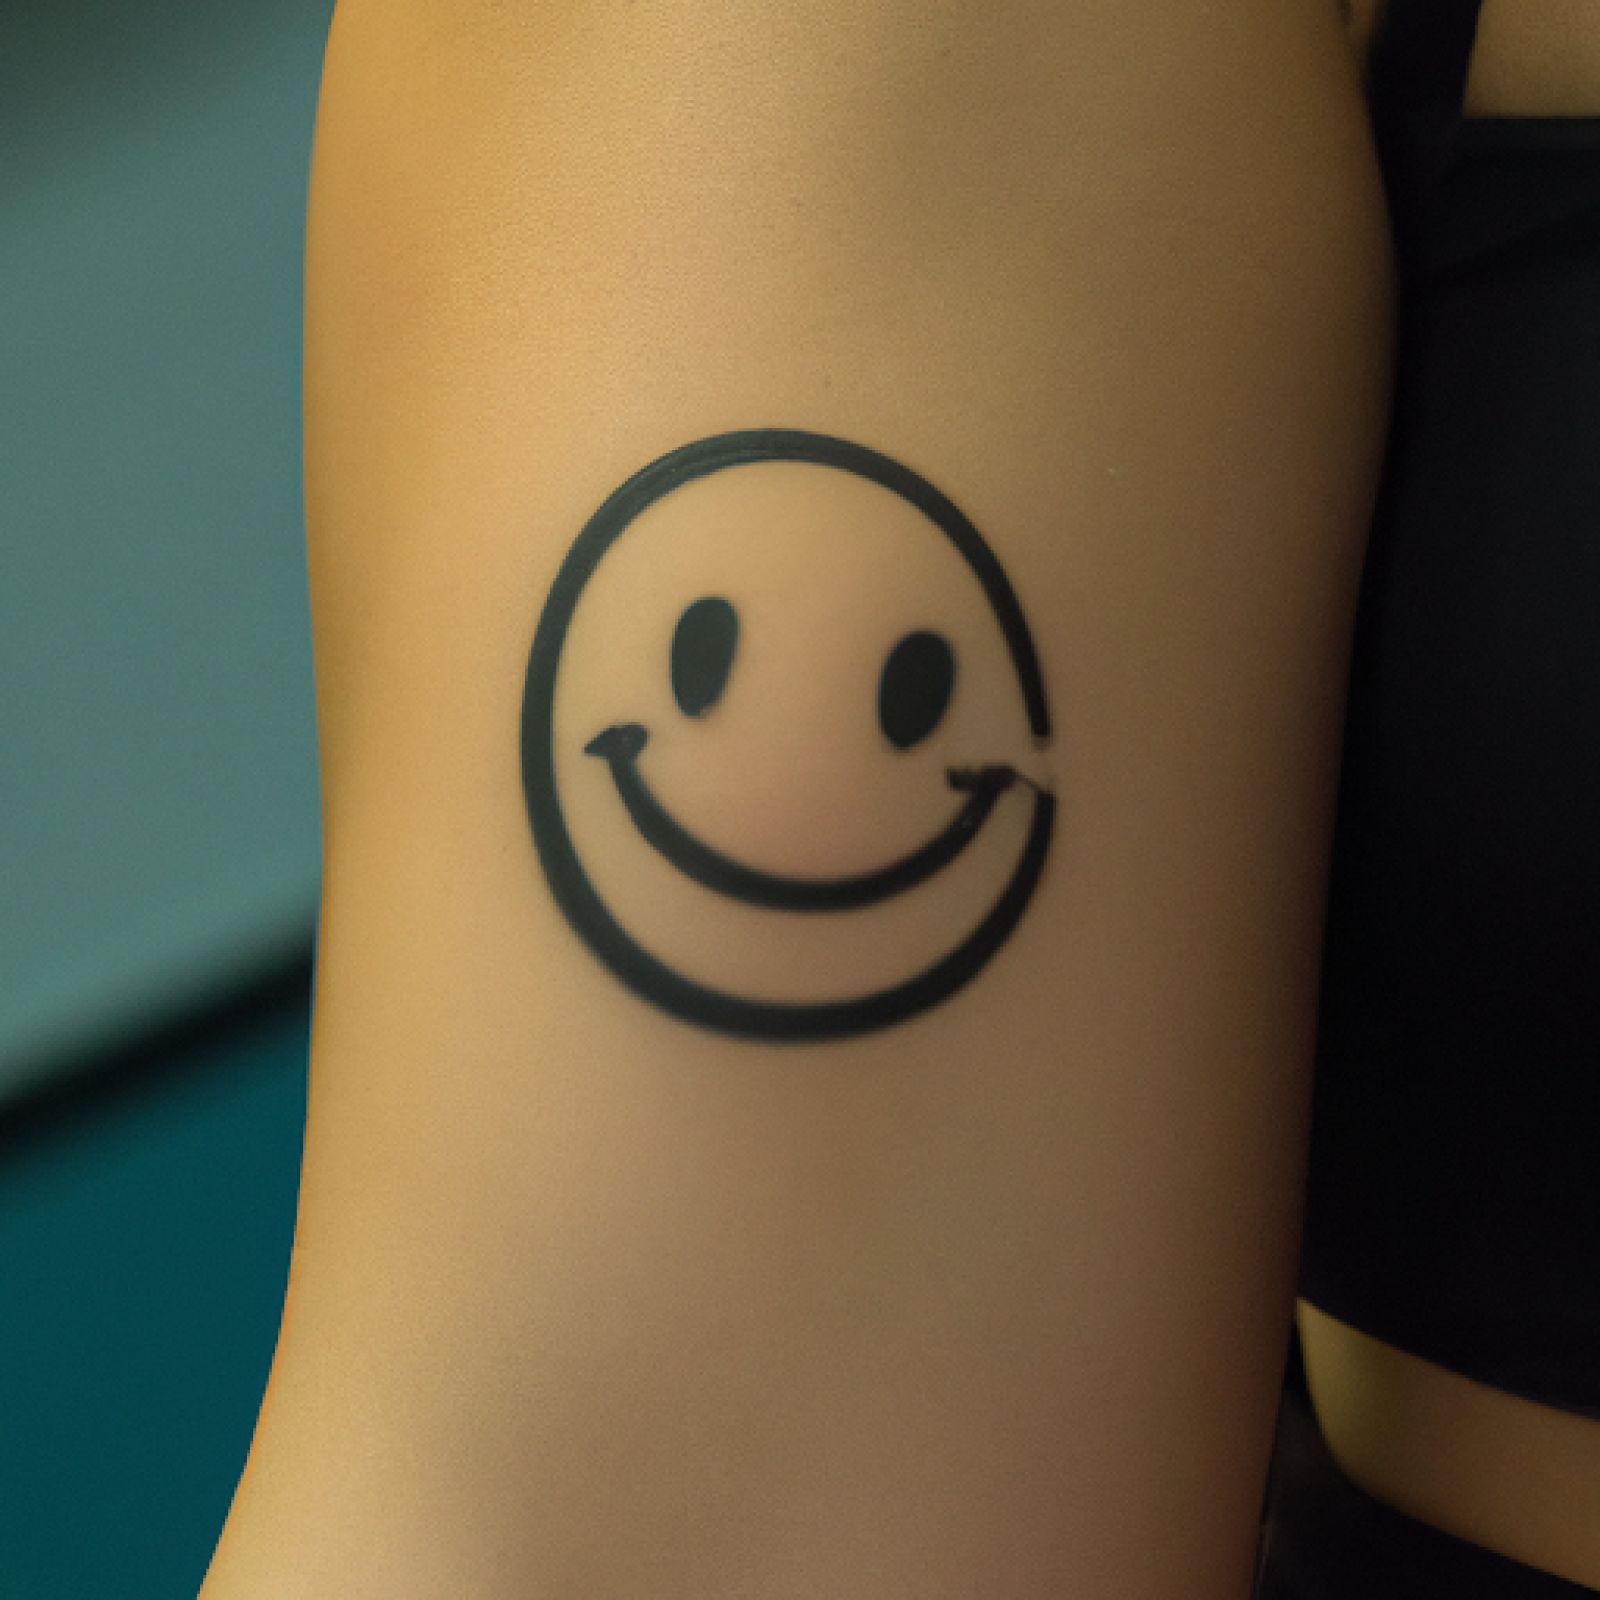 Smiley tattoo on arm for women